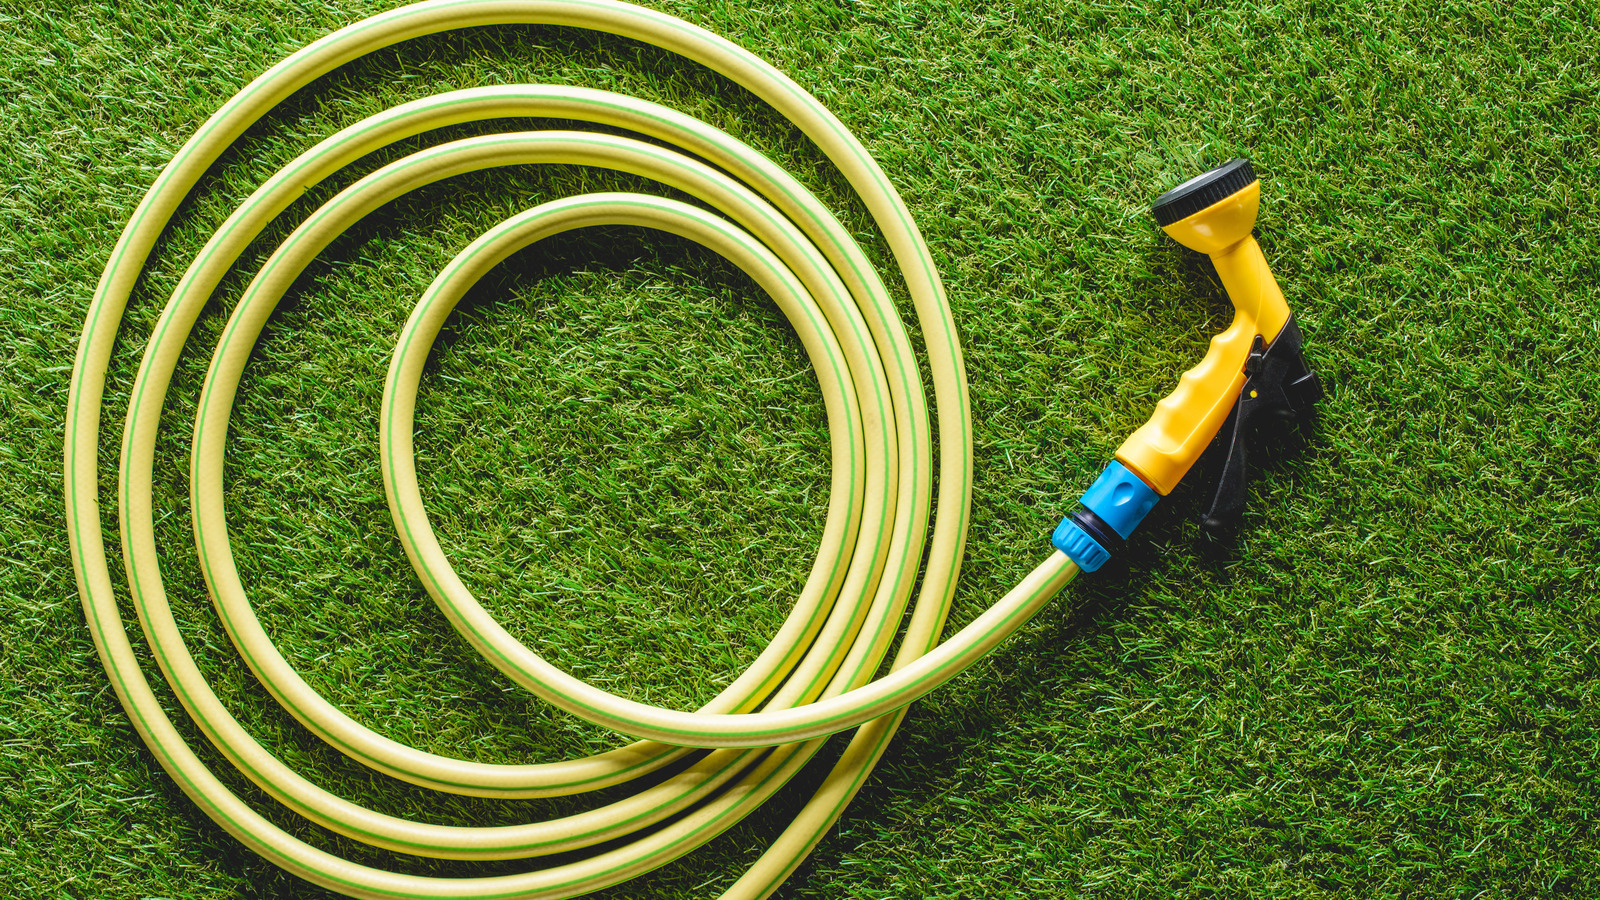 What You Need To Know Before Buying A Garden Hose At Home Depot